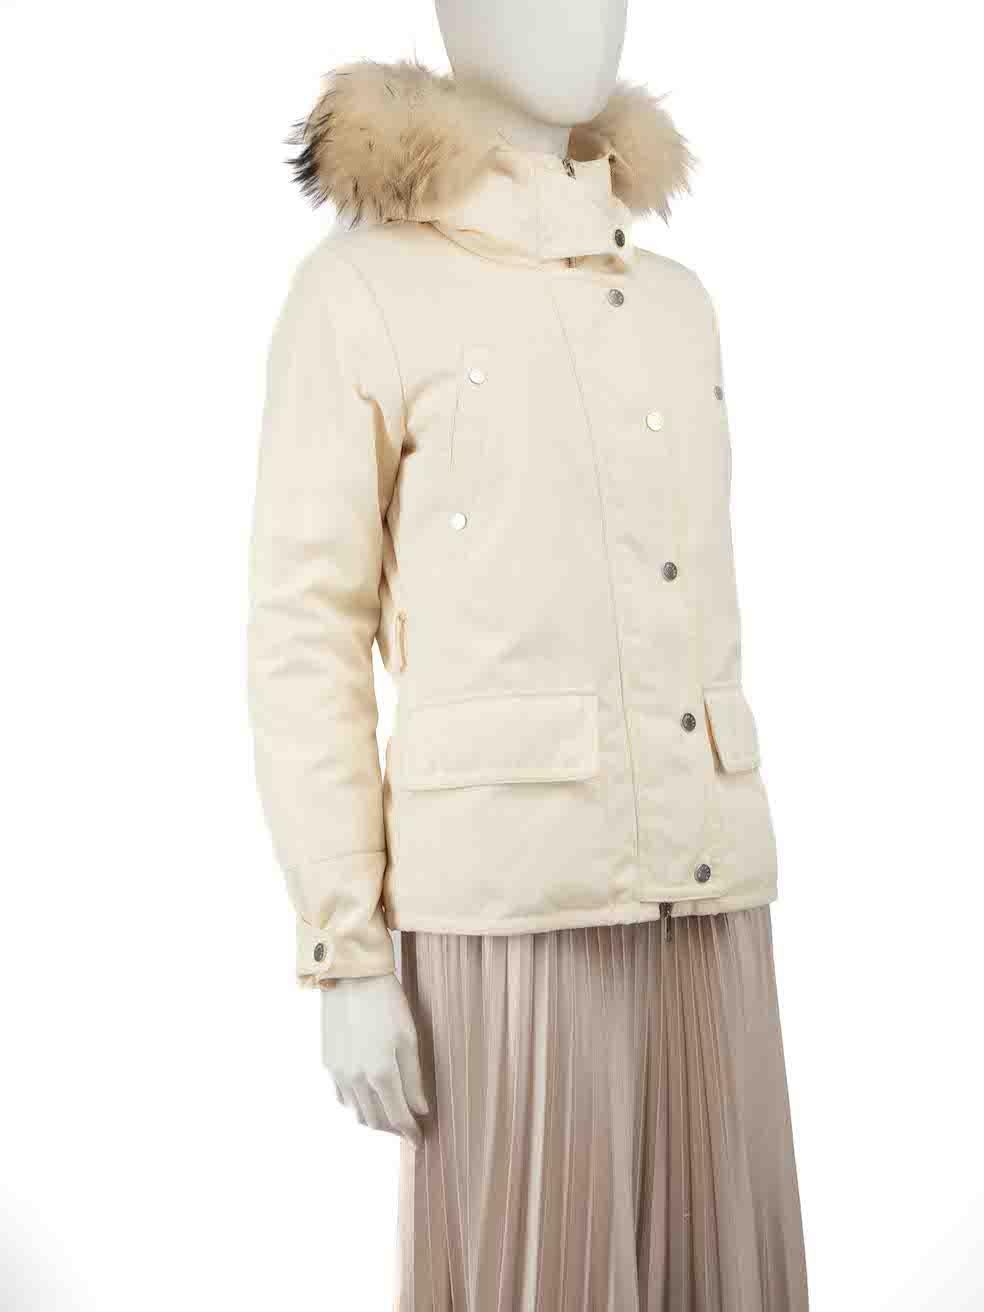 CONDITION is Good. Minor wear to coat is evident. Light wear to the front, back and lining with discoloured marks. The belt is also missing on this used Moncler designer resale item.
 
Details
Ecru
Polyester
Down coat
Duvet down
Hooded
Detachable